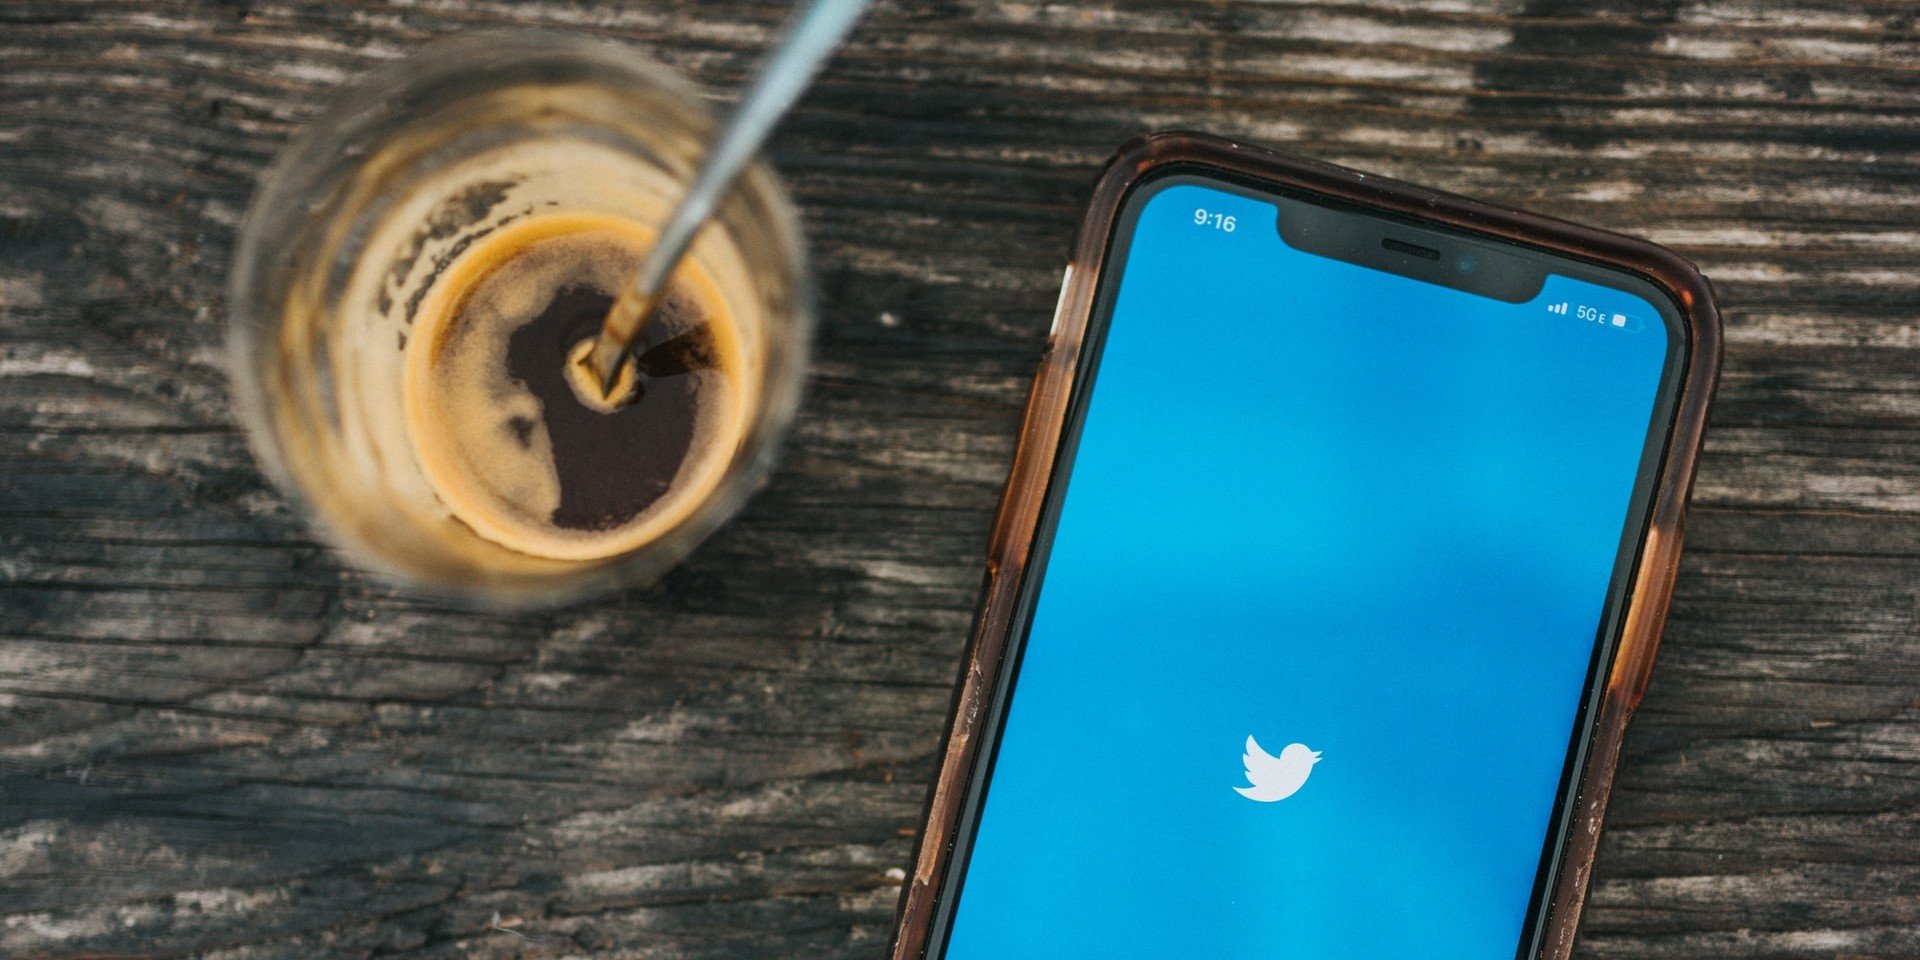 The DPM Weekly Update: Twitter Reopens Applications for Verified Accounts